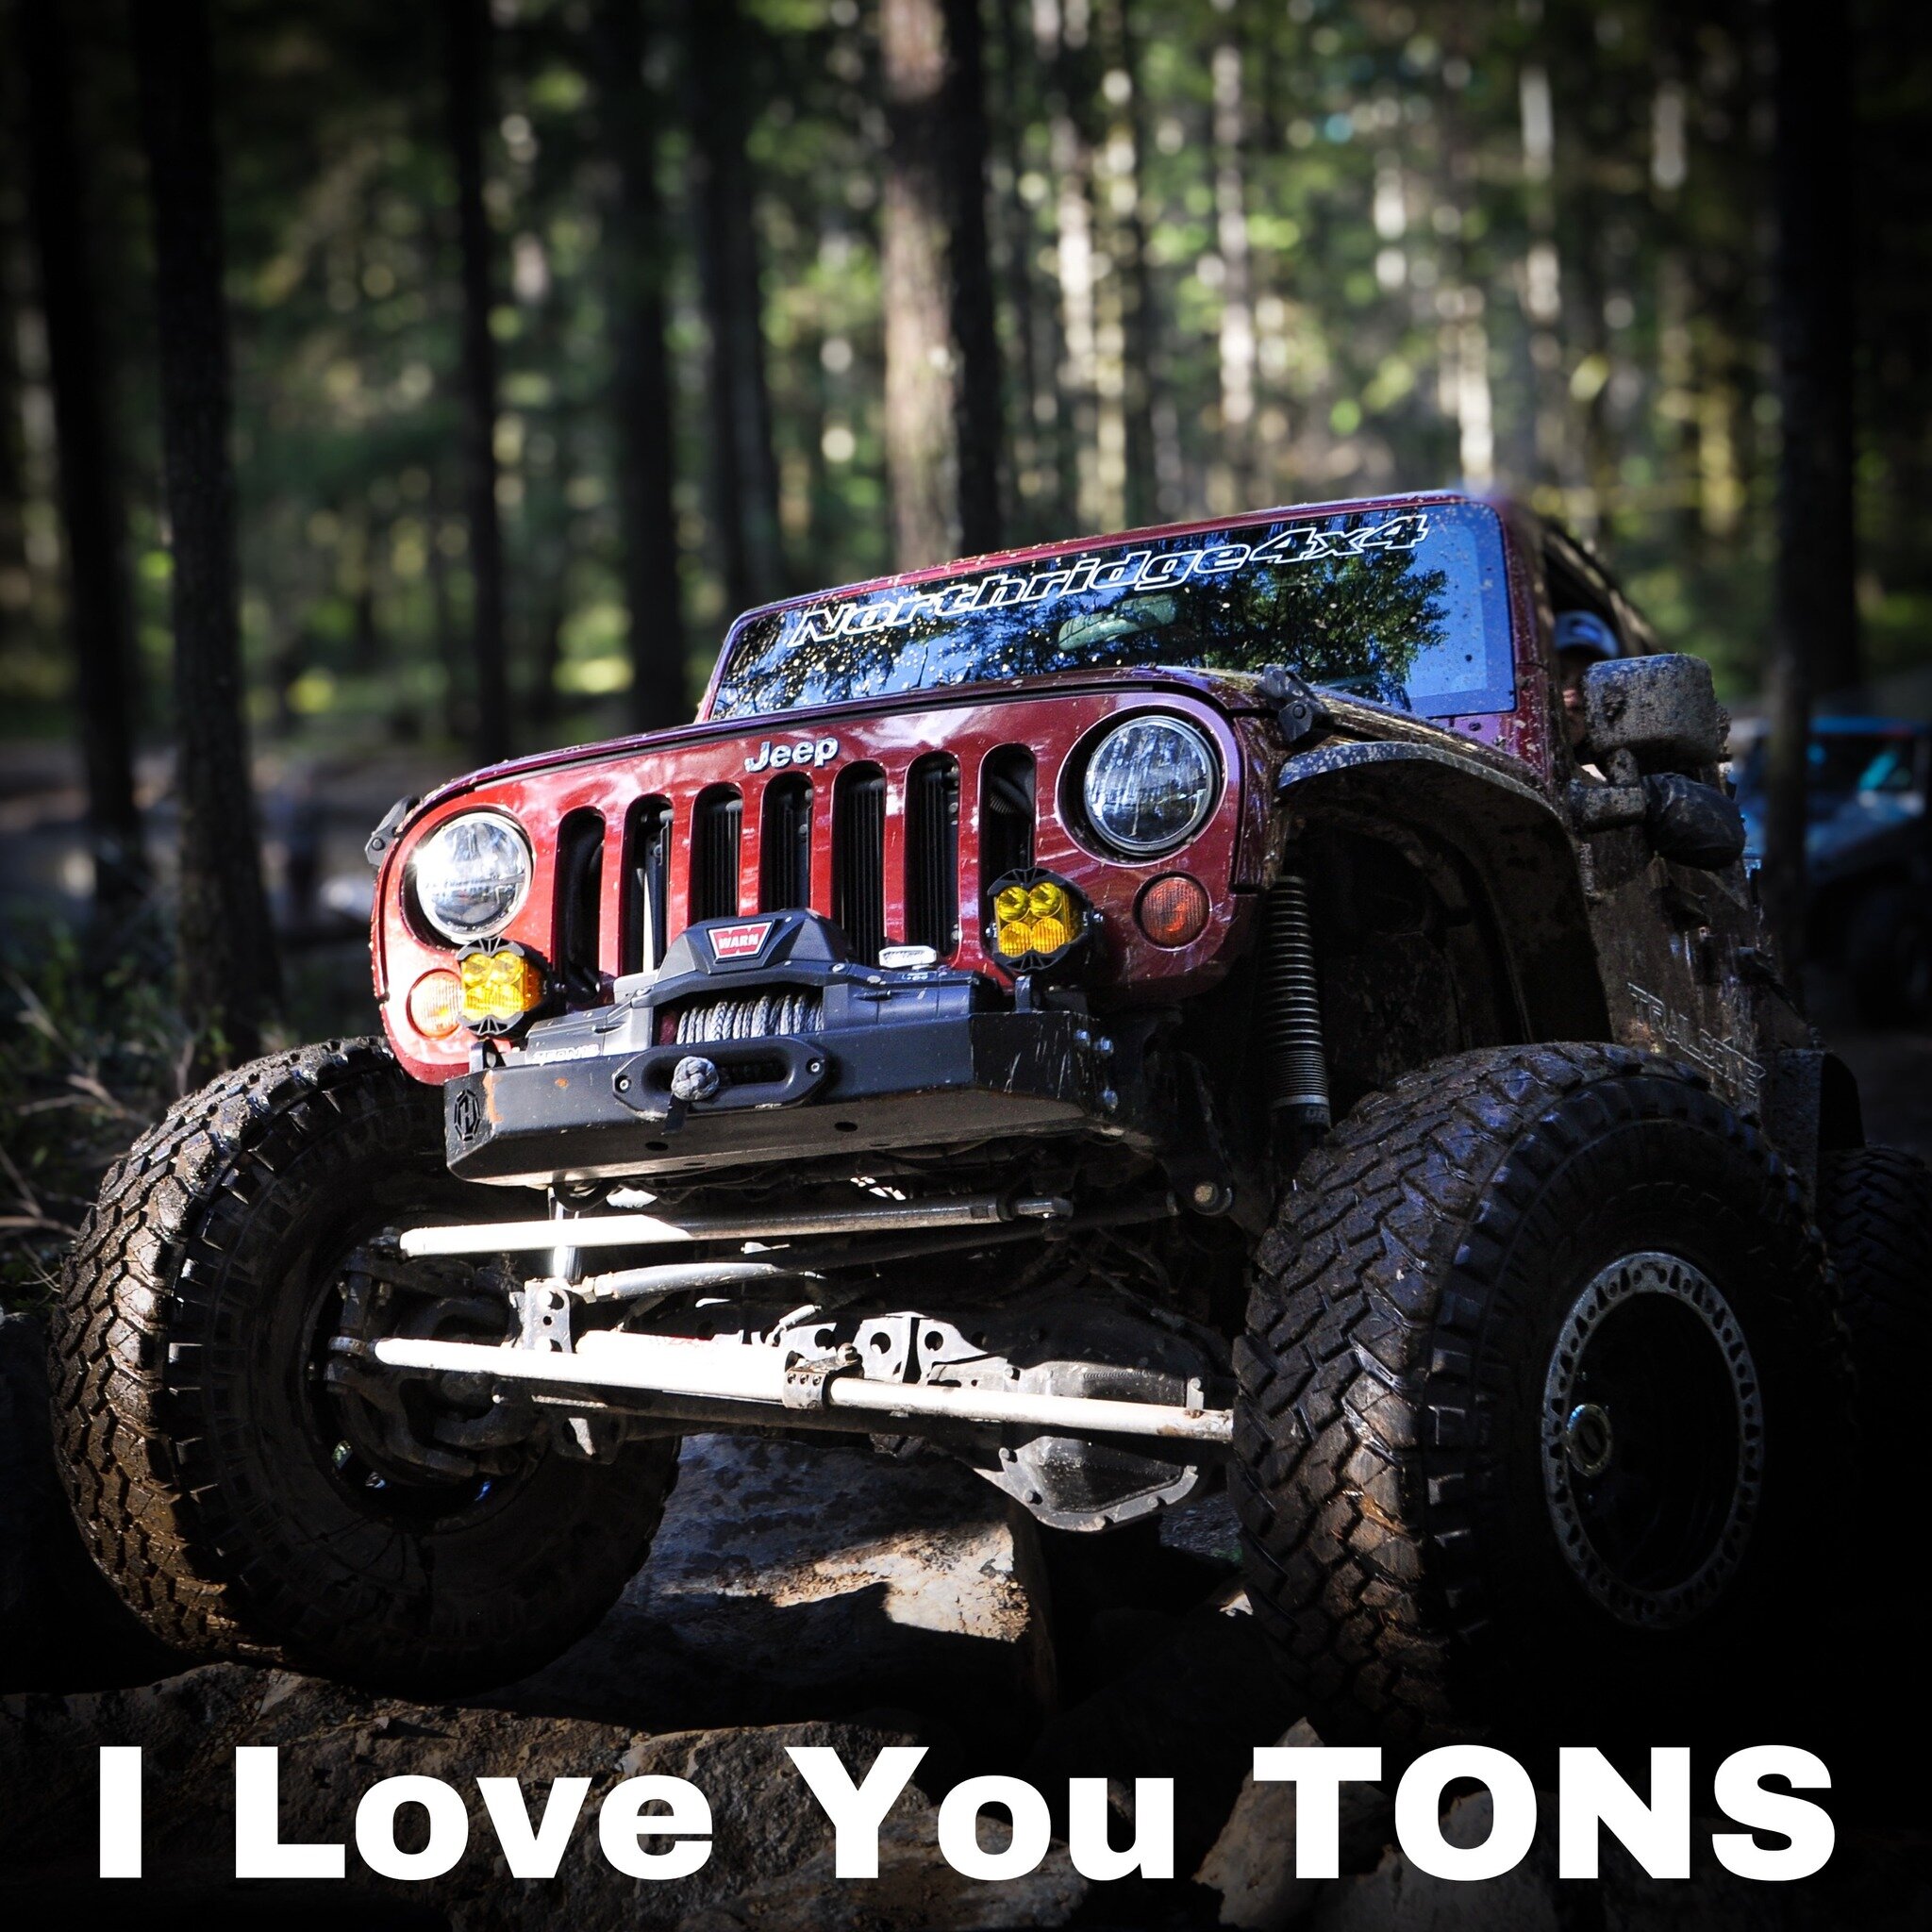 Happy Valentine's Day to all the lovers out there... lovers of one tons and 40s 😎

Trailcoinsusa.com
Custom Challenge Coins and apparel to commemorate your 4x4 accomplishments on and off the trail. 

#offroad #adventure #1tonjeeps #jkontons #challen